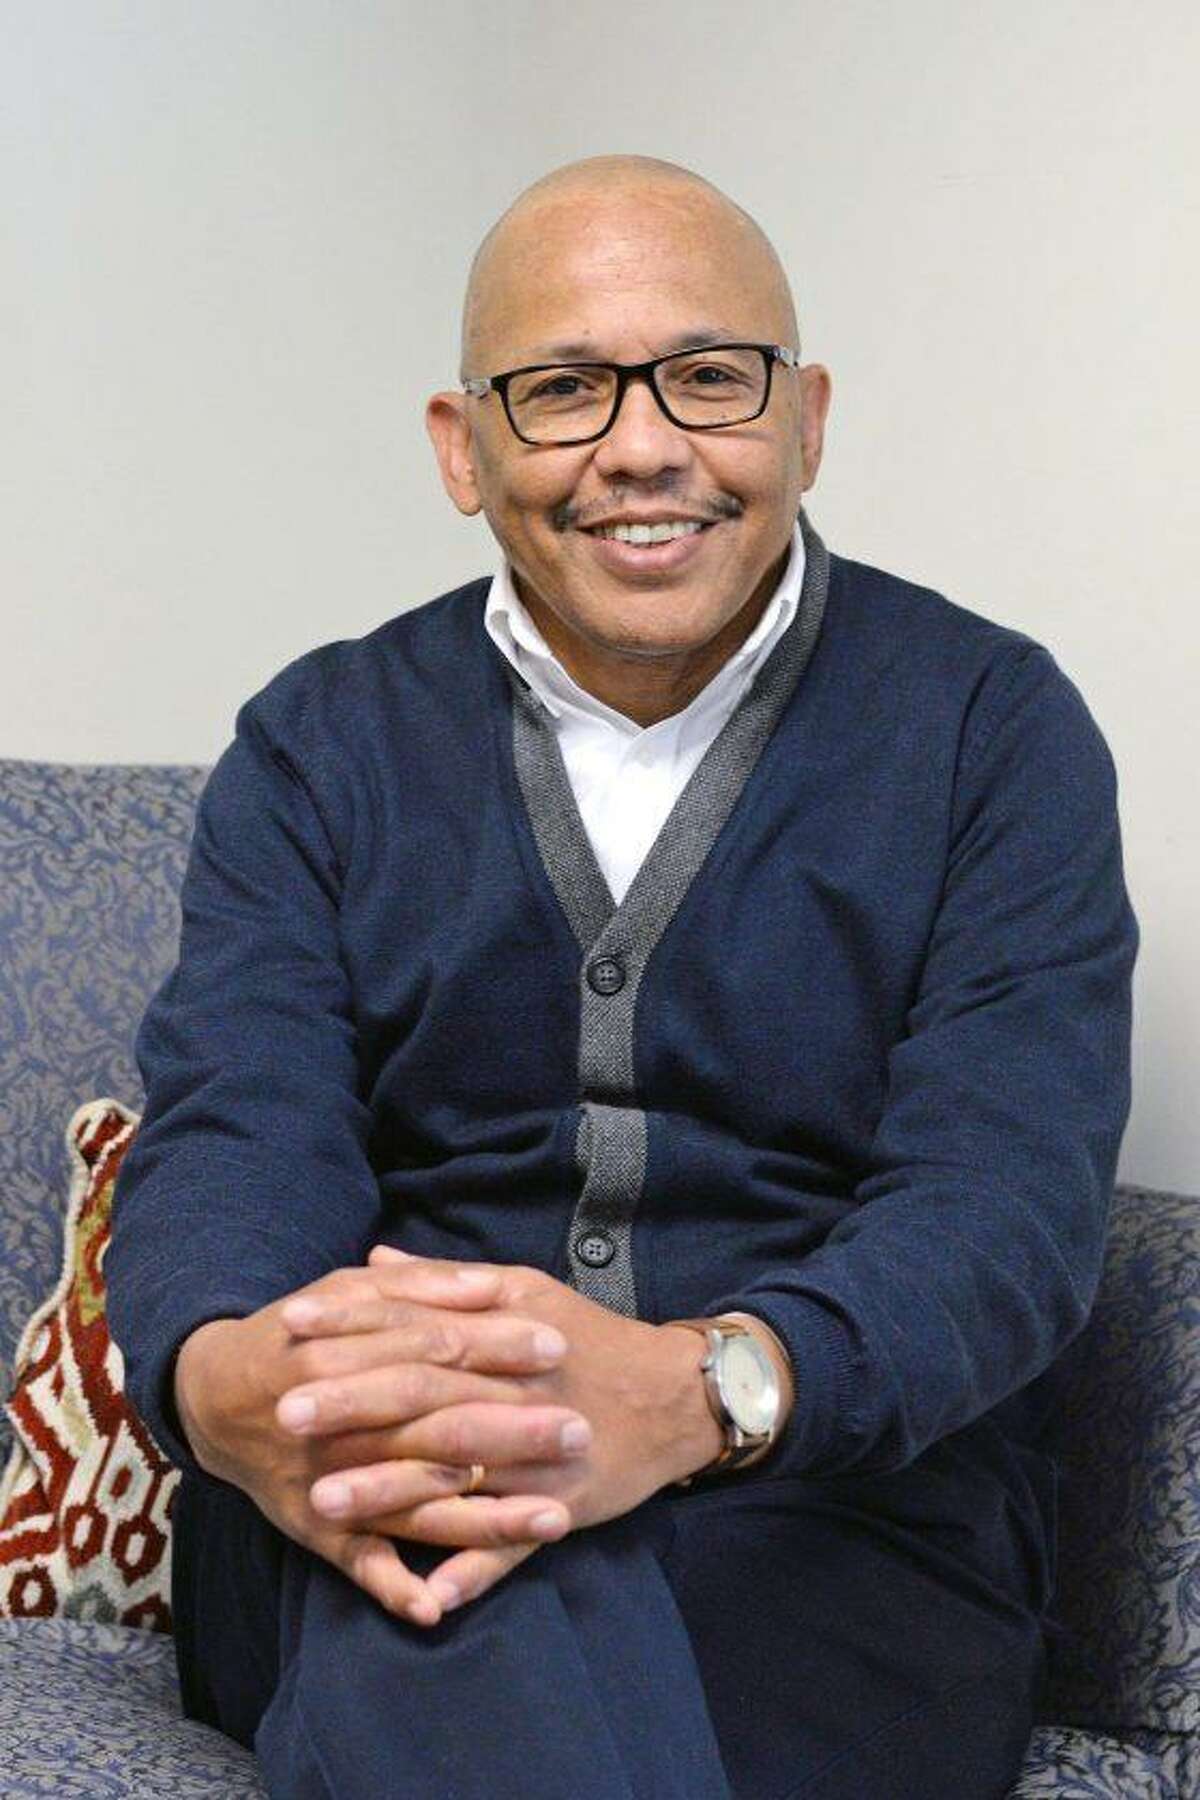 “Alumni will often start out by saying to me, ’You probably don’t remember me, but I graduated from Wesleyan in 1995. And I always remember them. That’s why I’ve continued to do this work. I’ve had the privilege to witness their growth and success,” Cliff Thornton said.